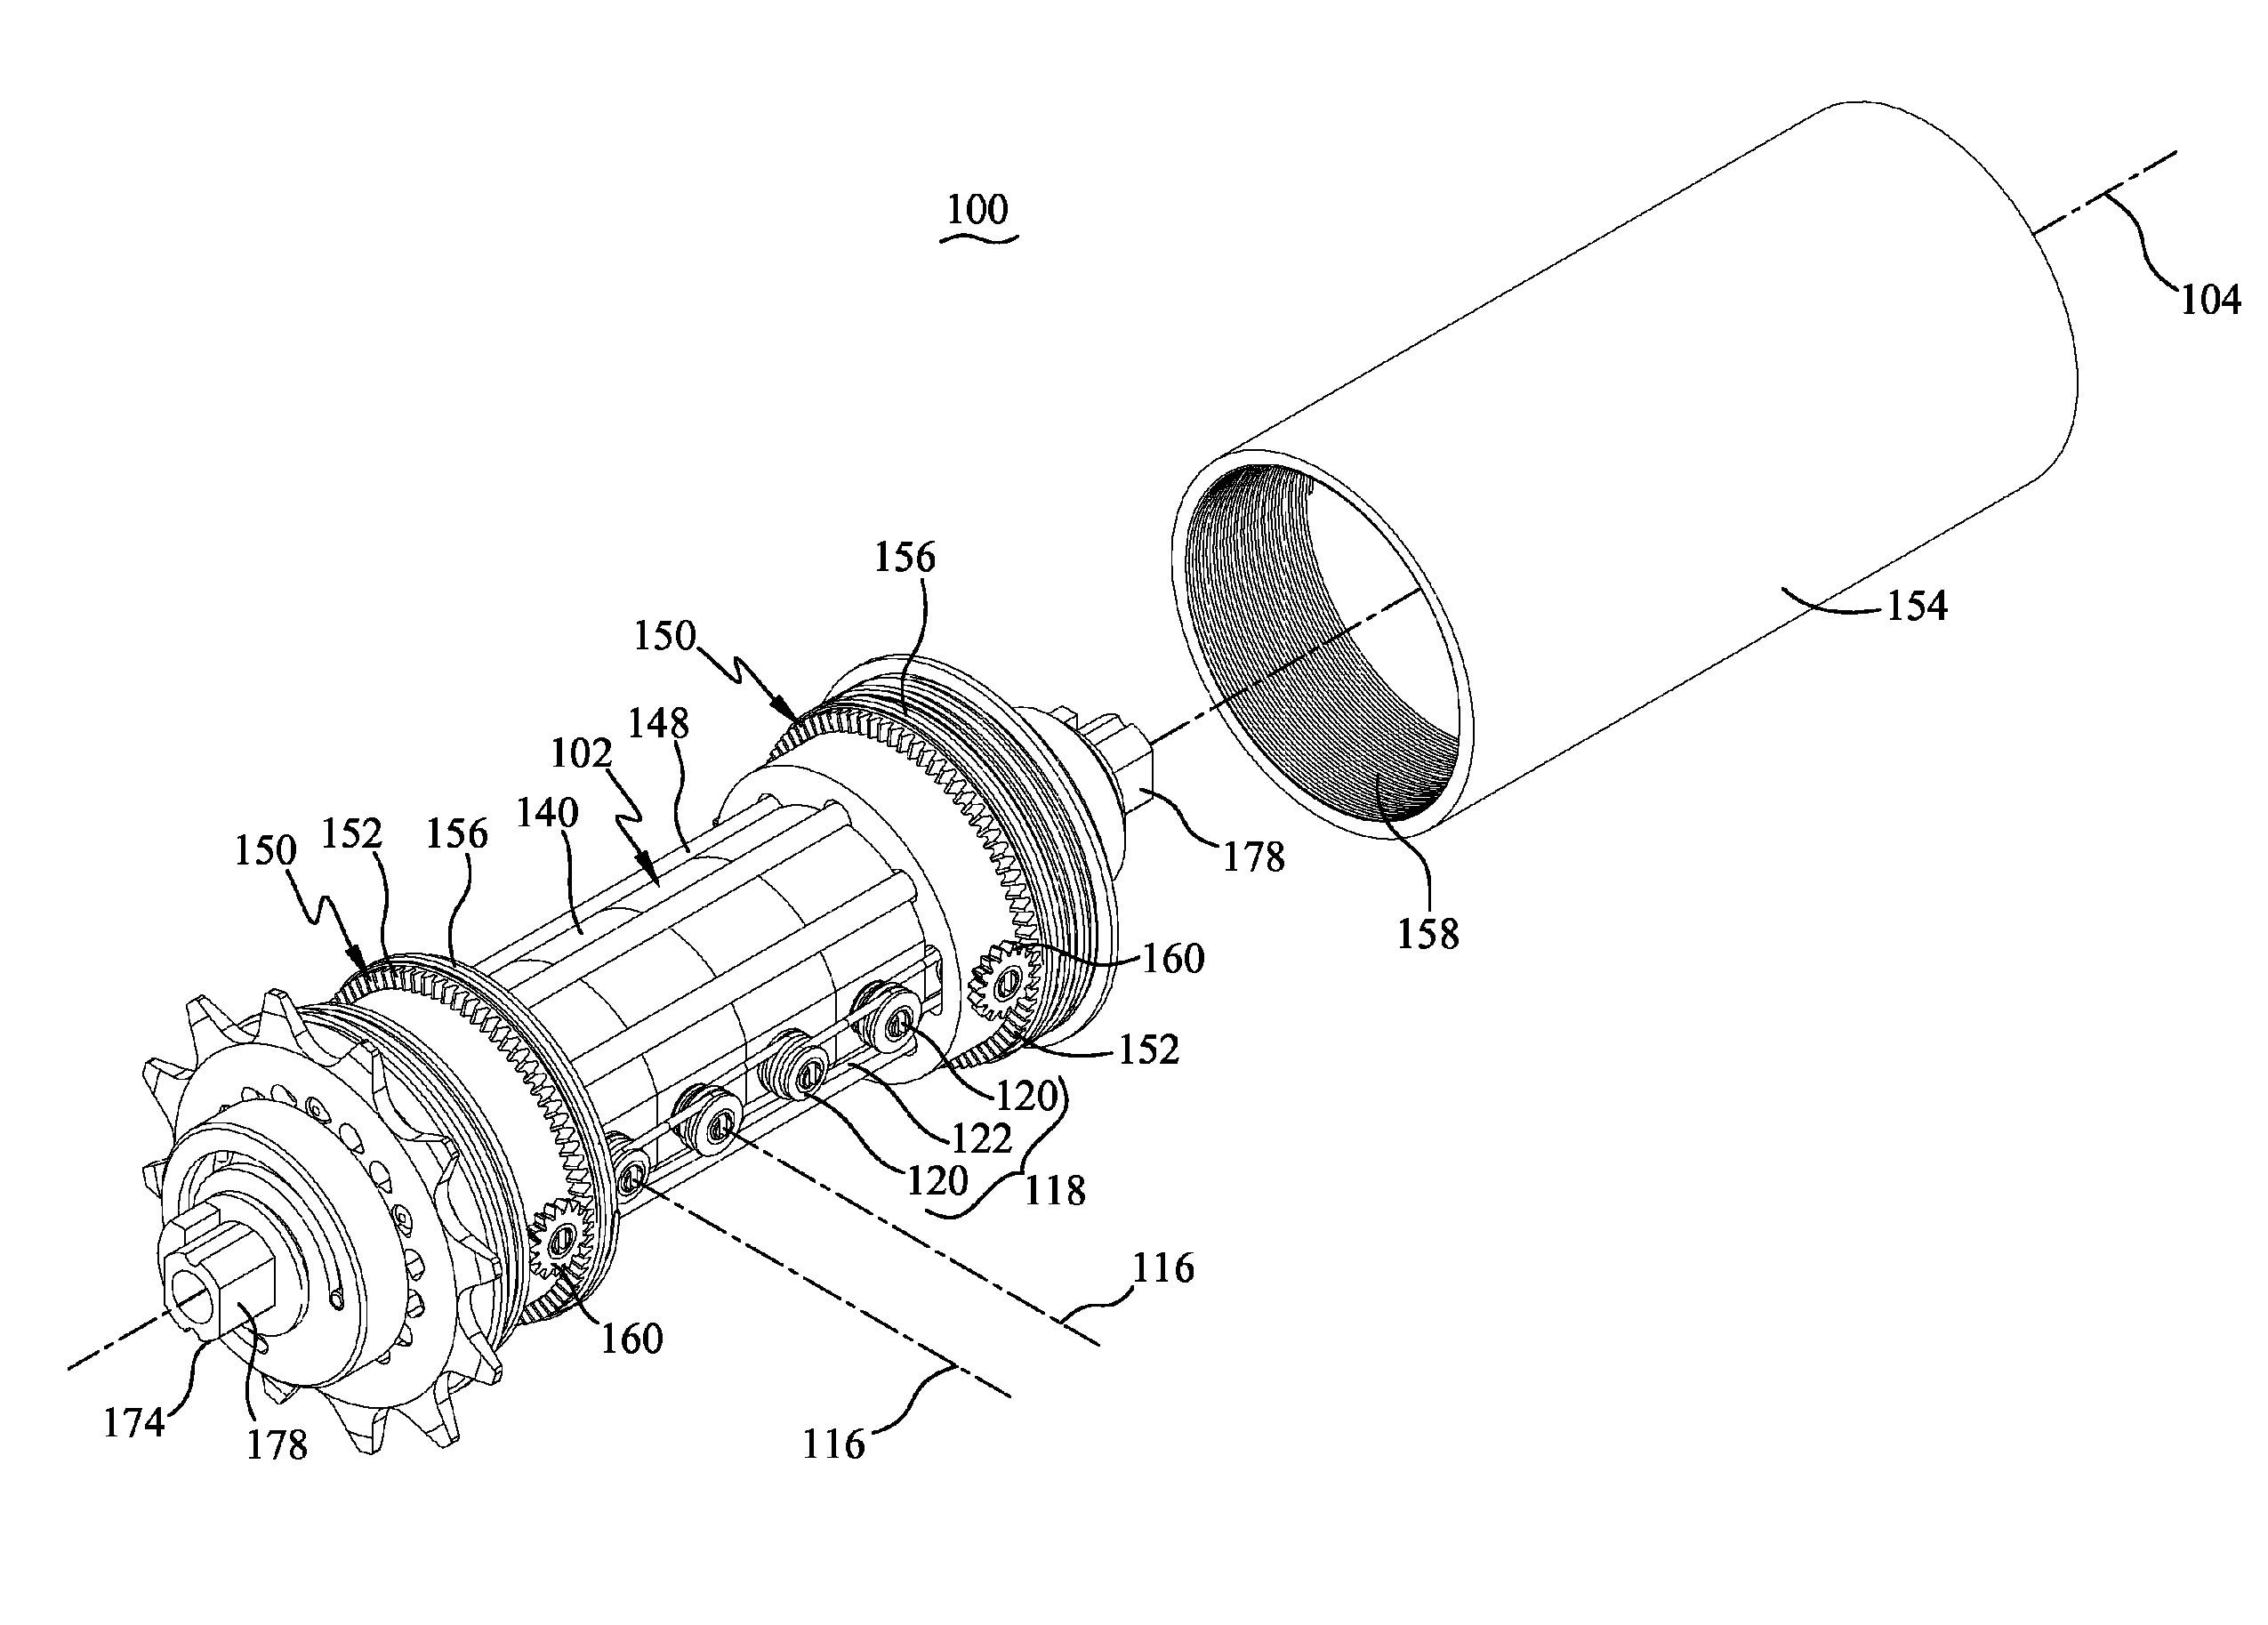 Multi-ratio transmission system with parallel vertical and coaxial planet gears